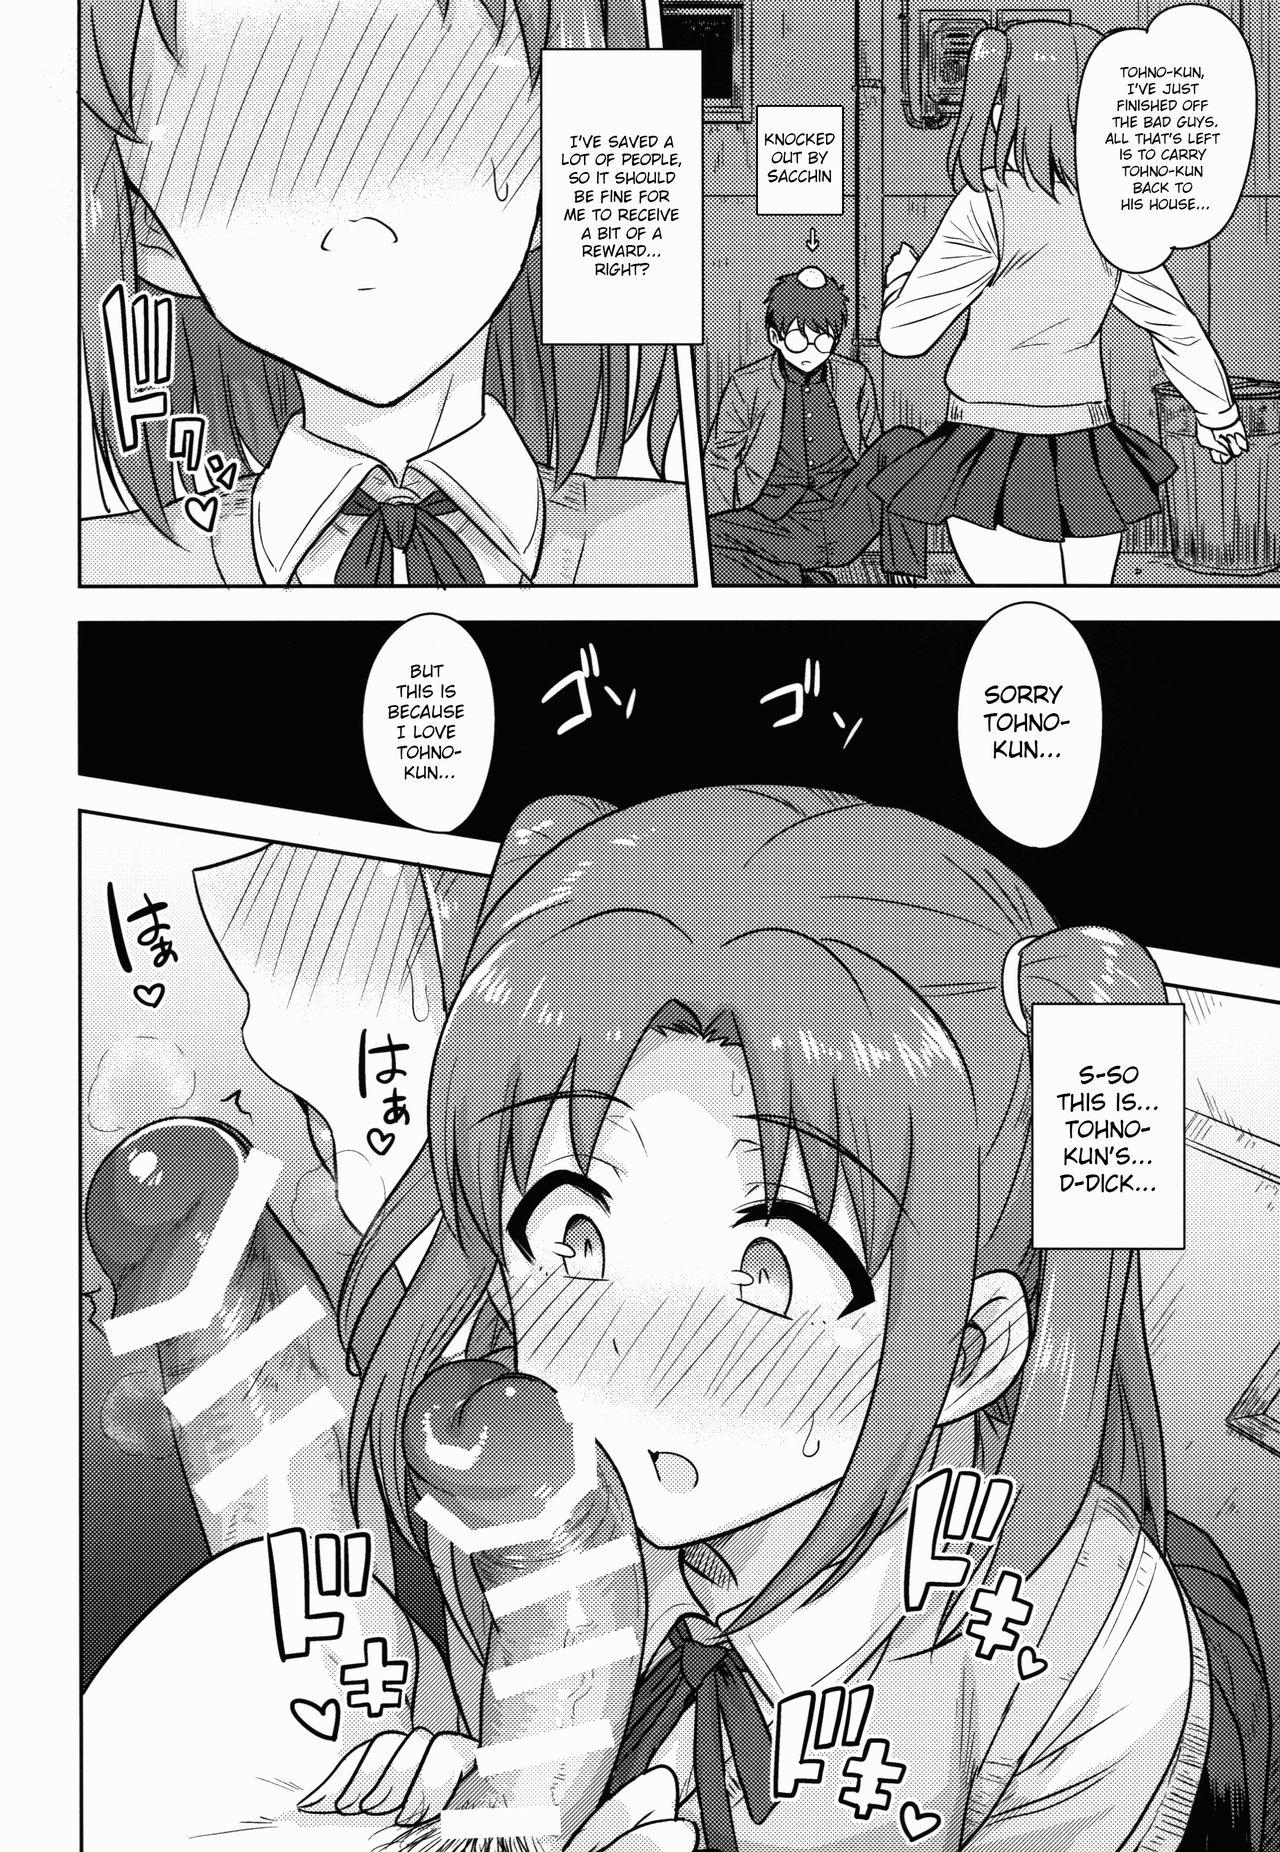 Plump Aru Hi no Futari MelBlo Hen | A Certain Day with Each Other Melty Blood Hen - Tsukihime Masturbating - Page 9